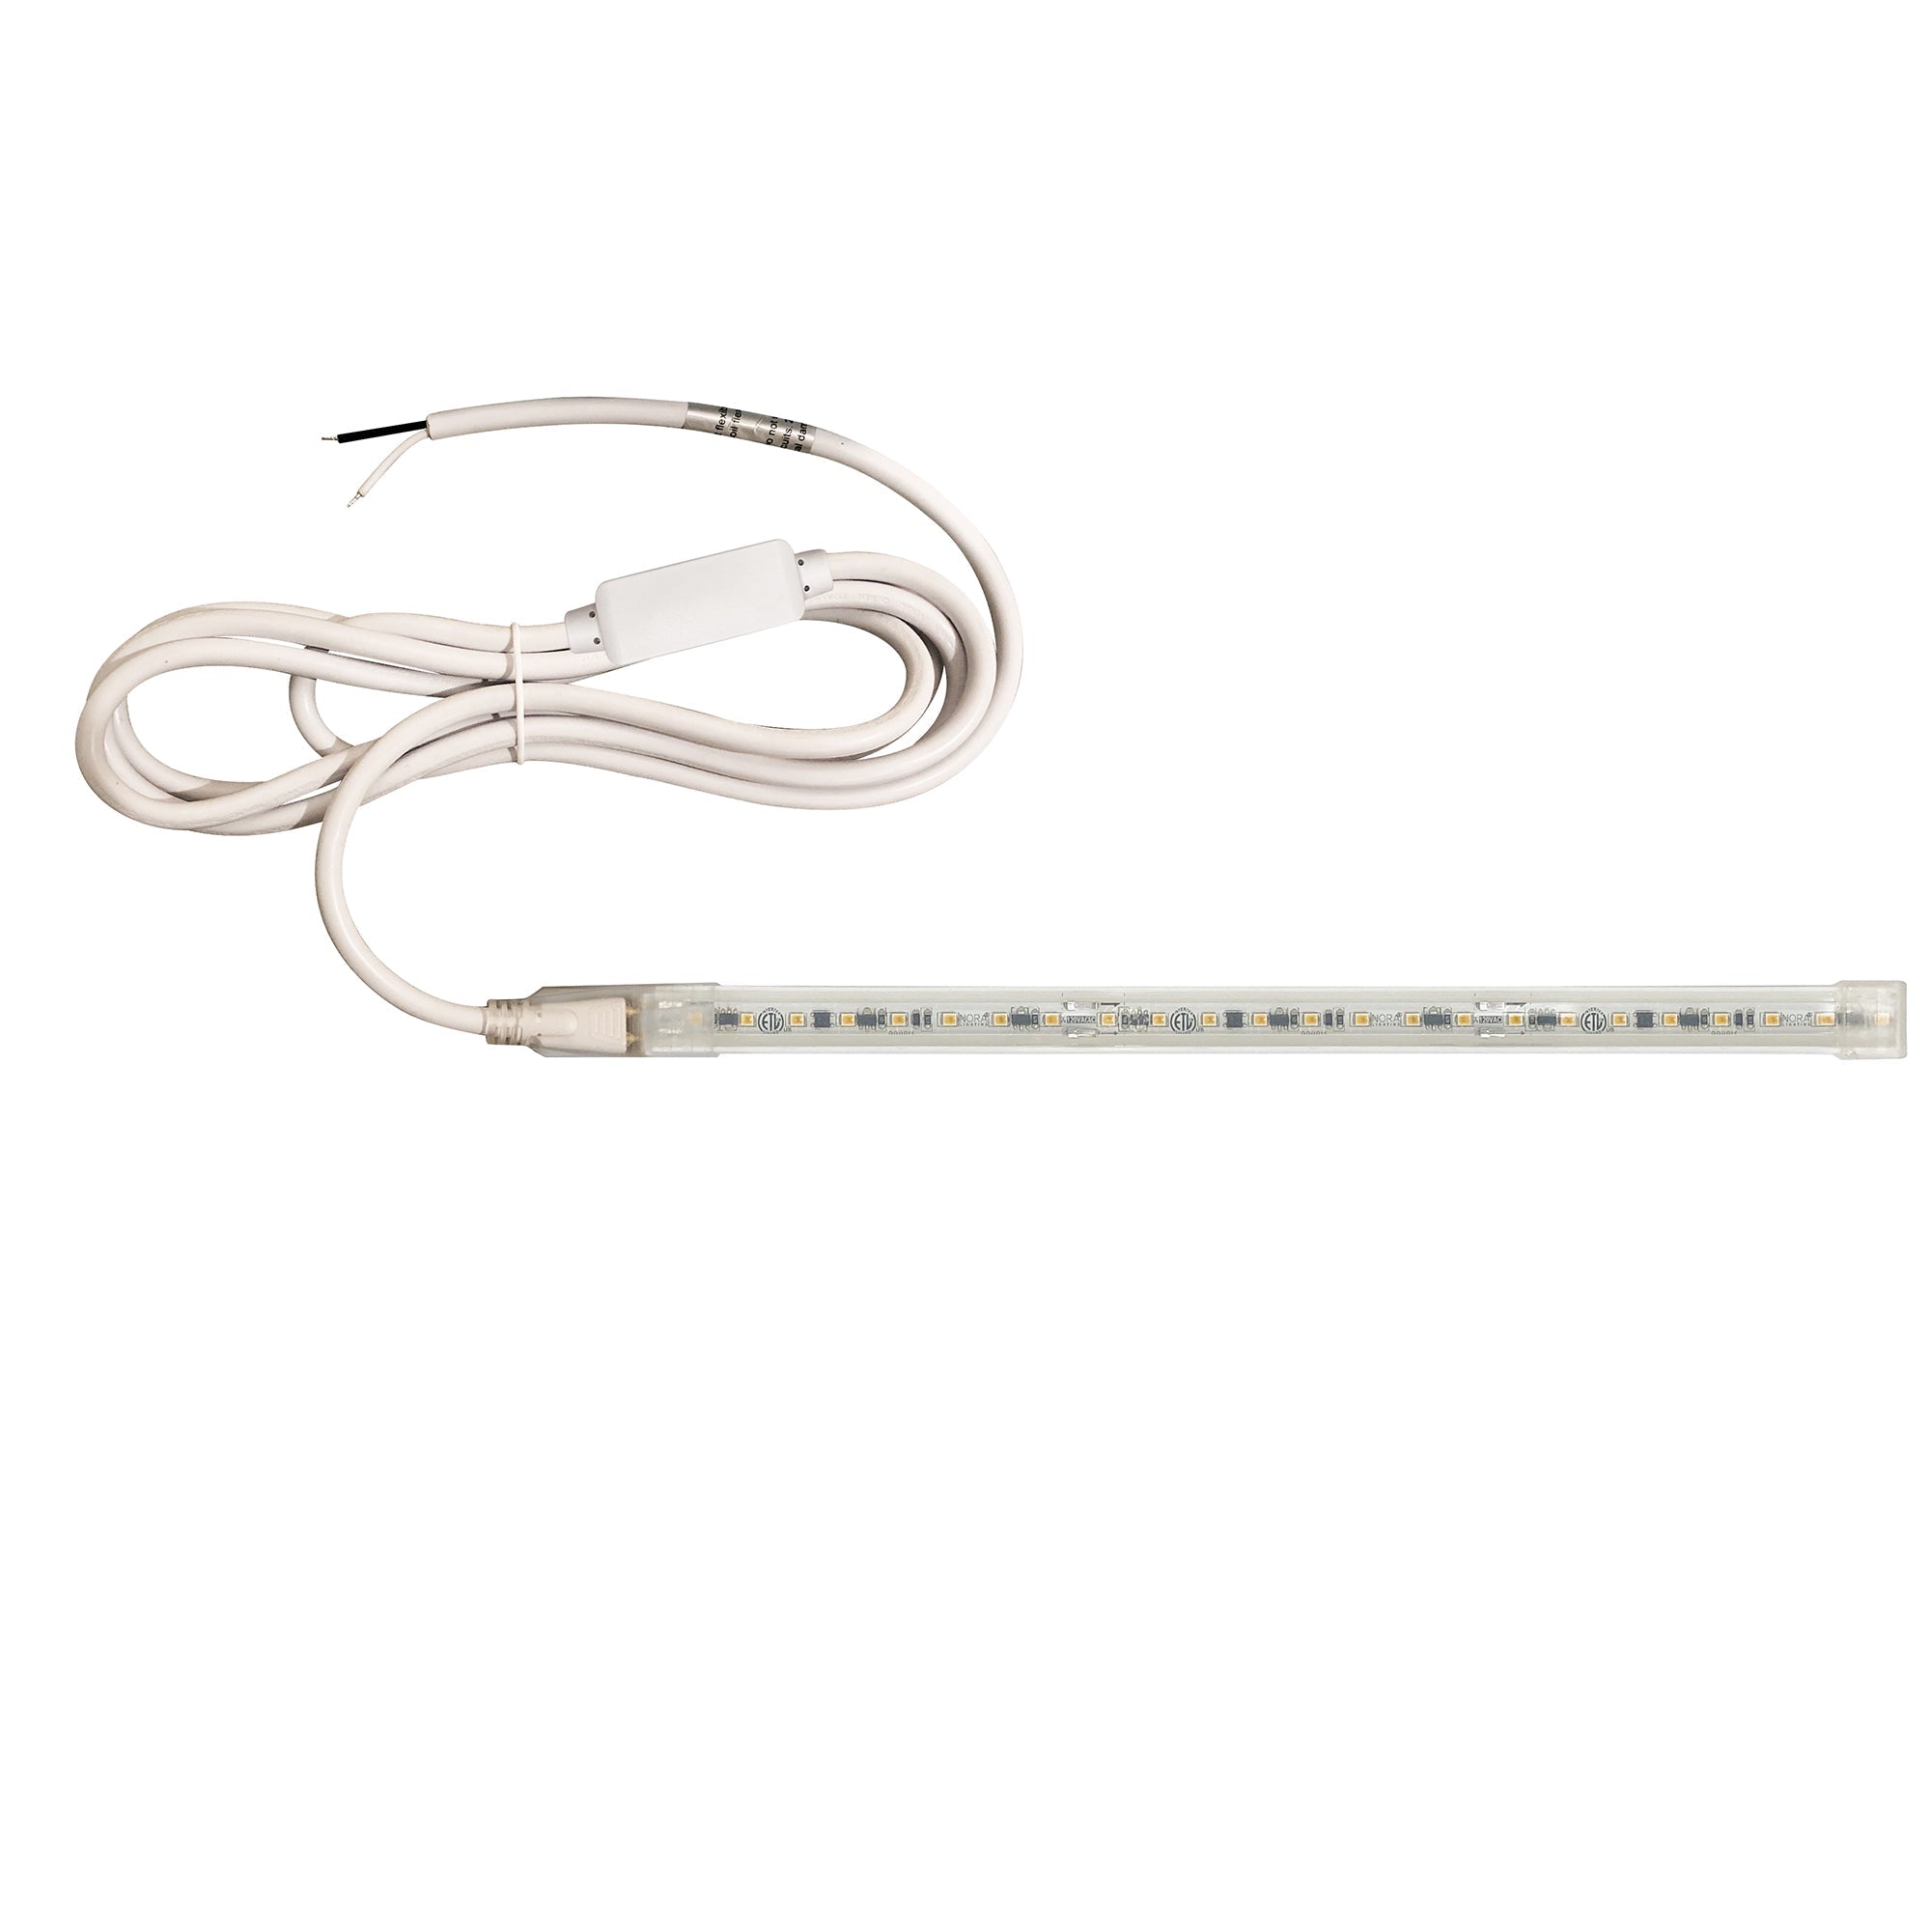 Nora Lighting NUTP13-W56-12-930/HWSP - Accent / Undercabinet - Custom Cut 56-ft 120V Continuous LED Tape Light, 330lm / 3.6W per foot, 3000K, w/ Mounting Clips and 8' Hardwired Power Cord w/ Surge Protector